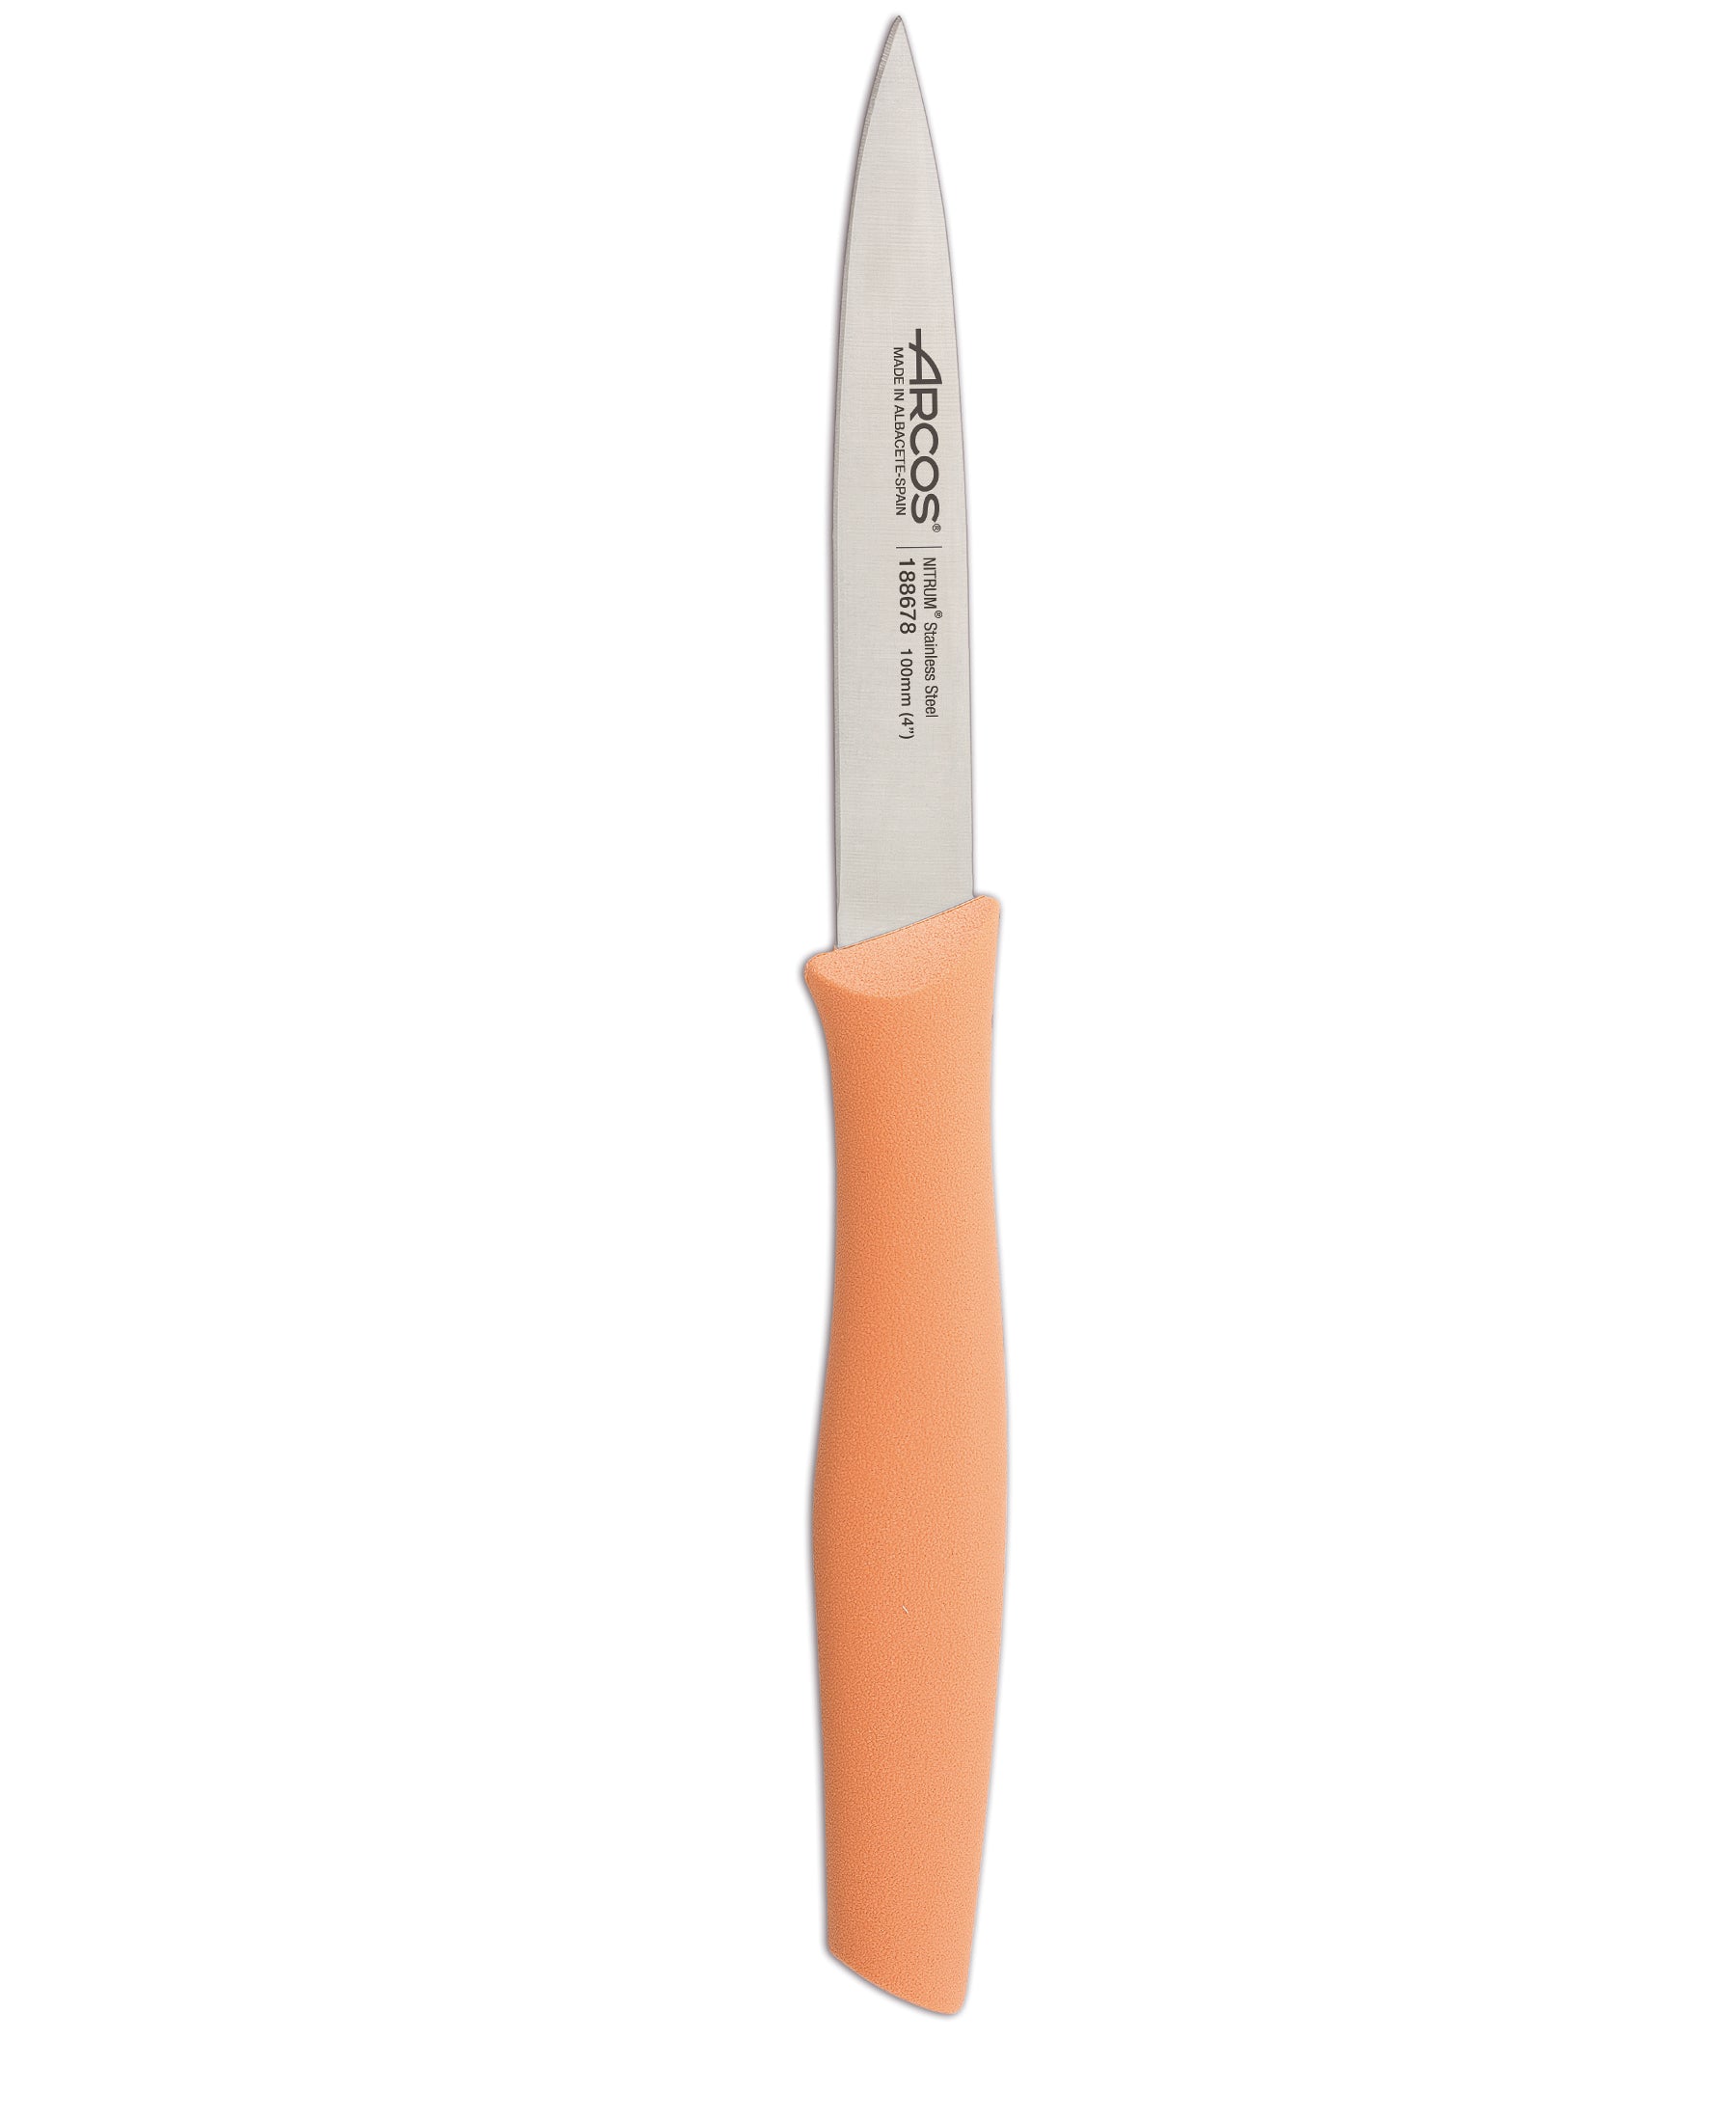 Arcos Pairing Knife 100mm - Coral